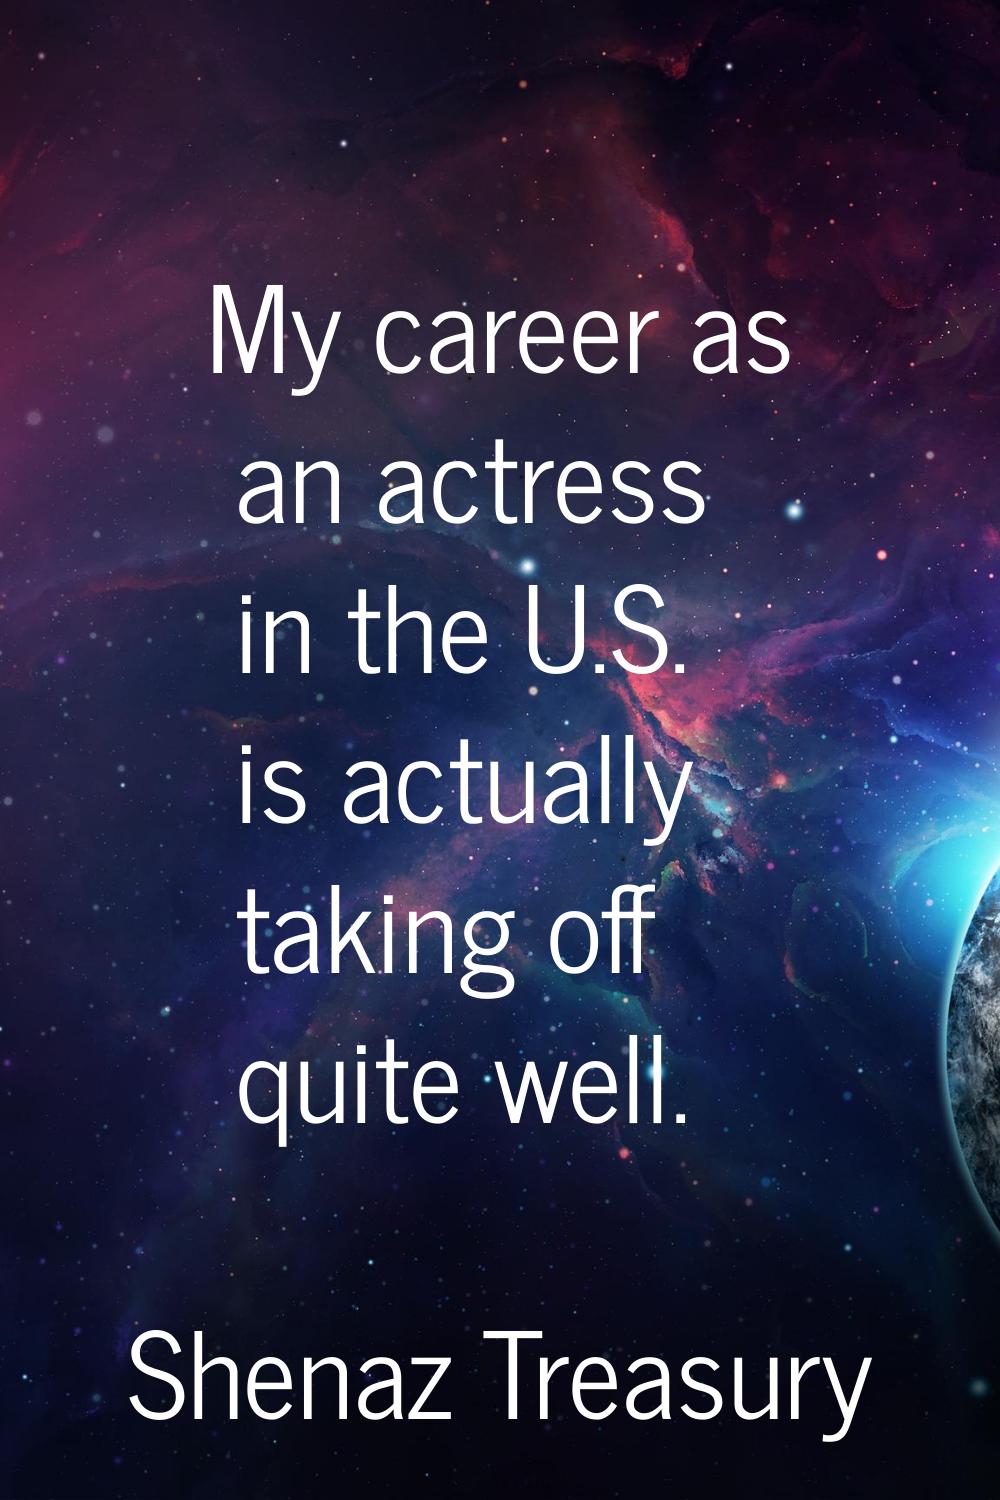 My career as an actress in the U.S. is actually taking off quite well.